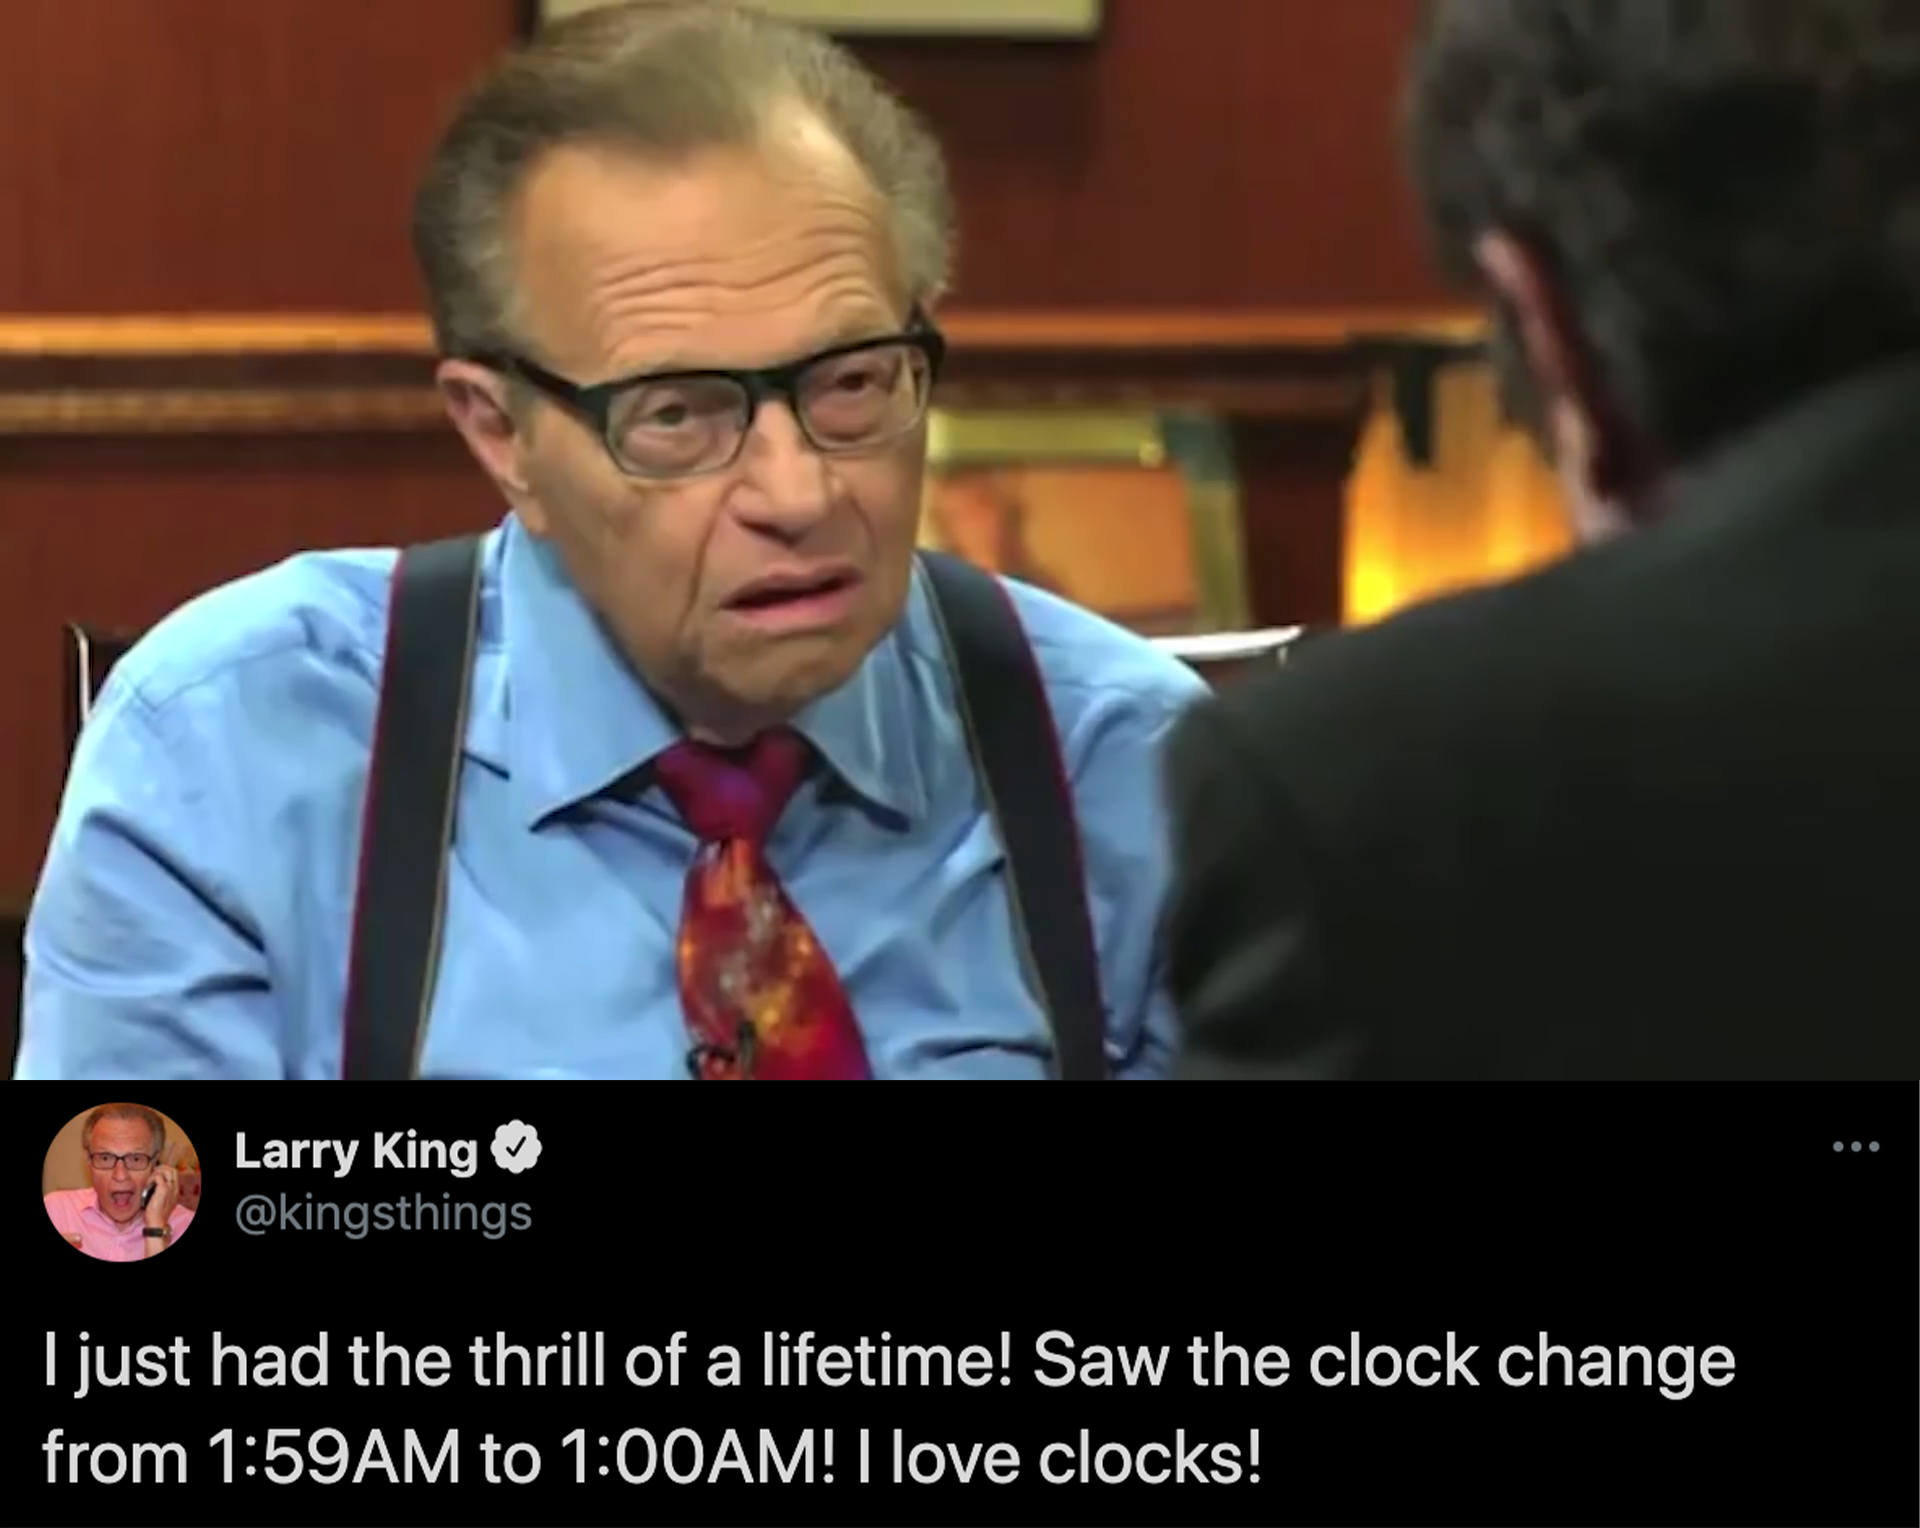 funny celebrity tweets - Larry King I just had the thrill of a lifetime! Saw the clock change from Am to Am! I love clocks!